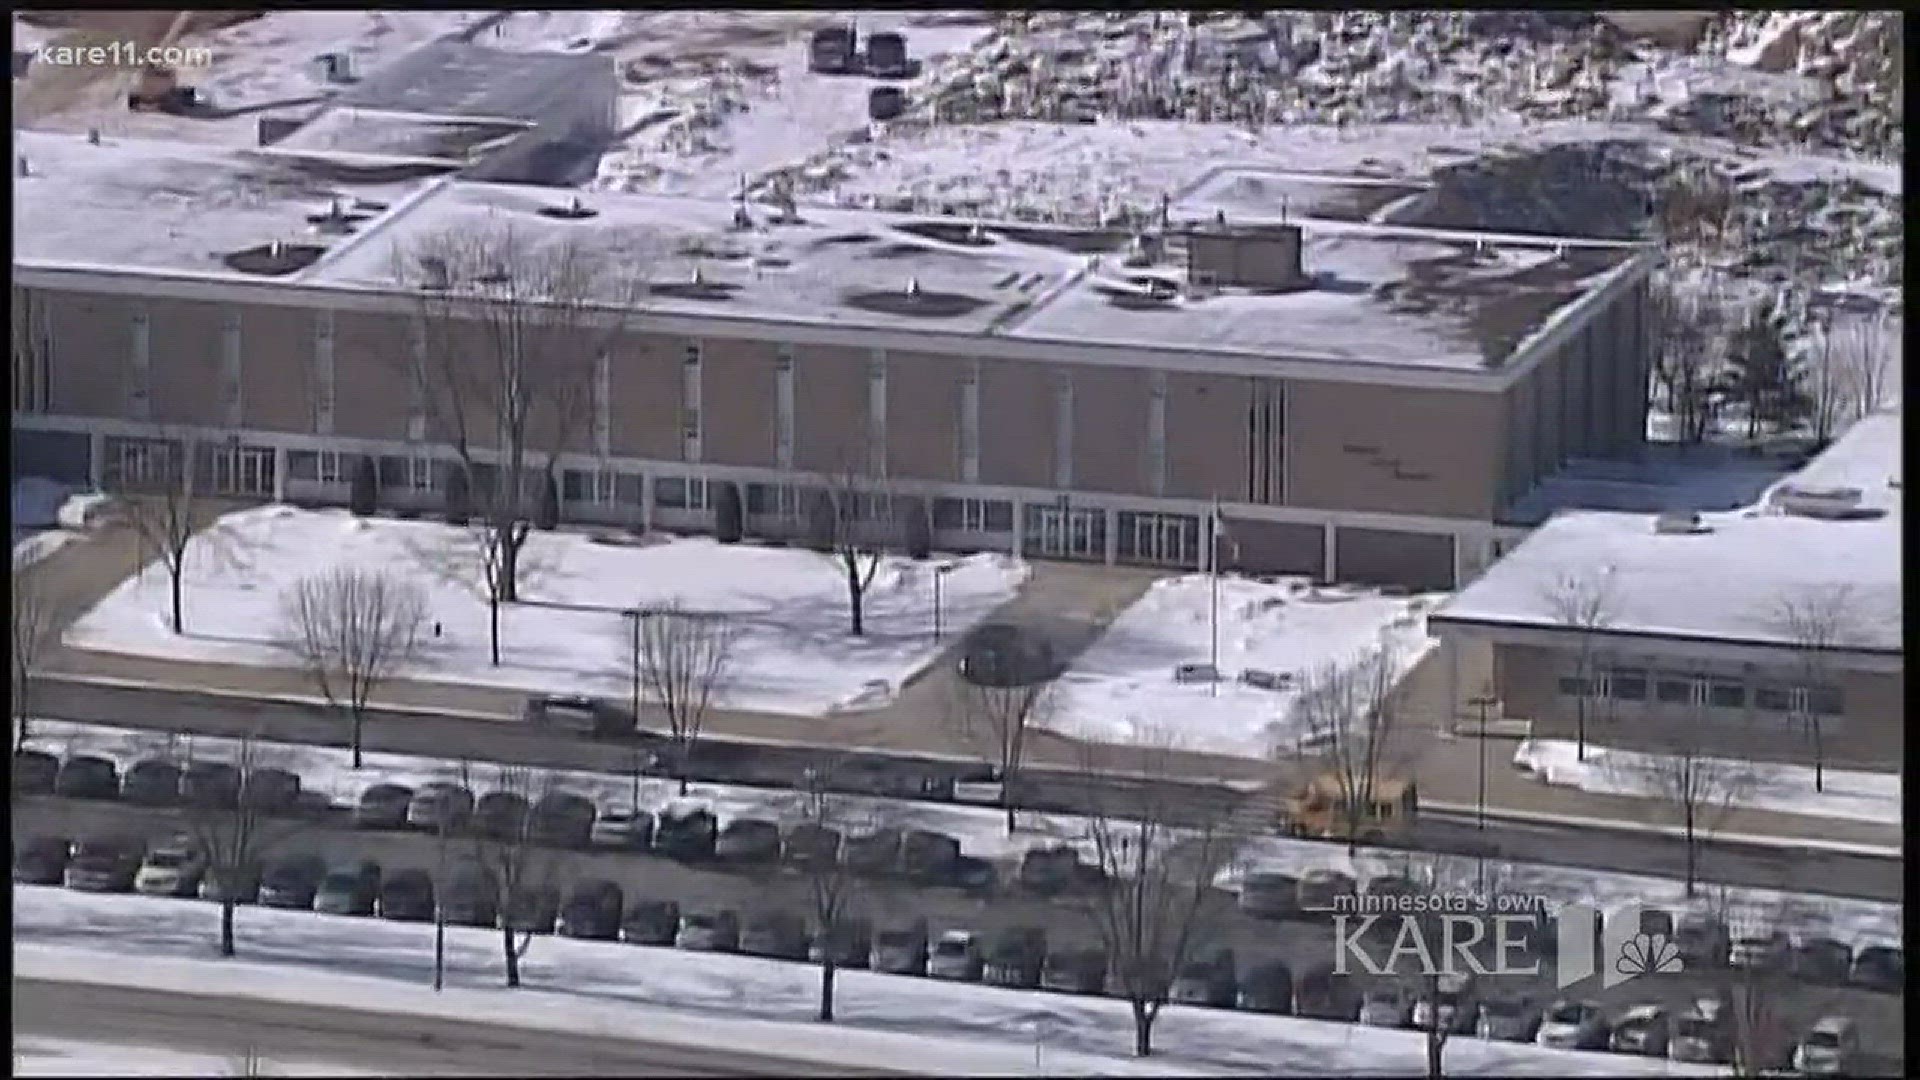 A GoFundMe page set up by the parent of another pupil says the student, who's described as having autism, didn't mean the threat. http://kare11.tv/2otiXhw